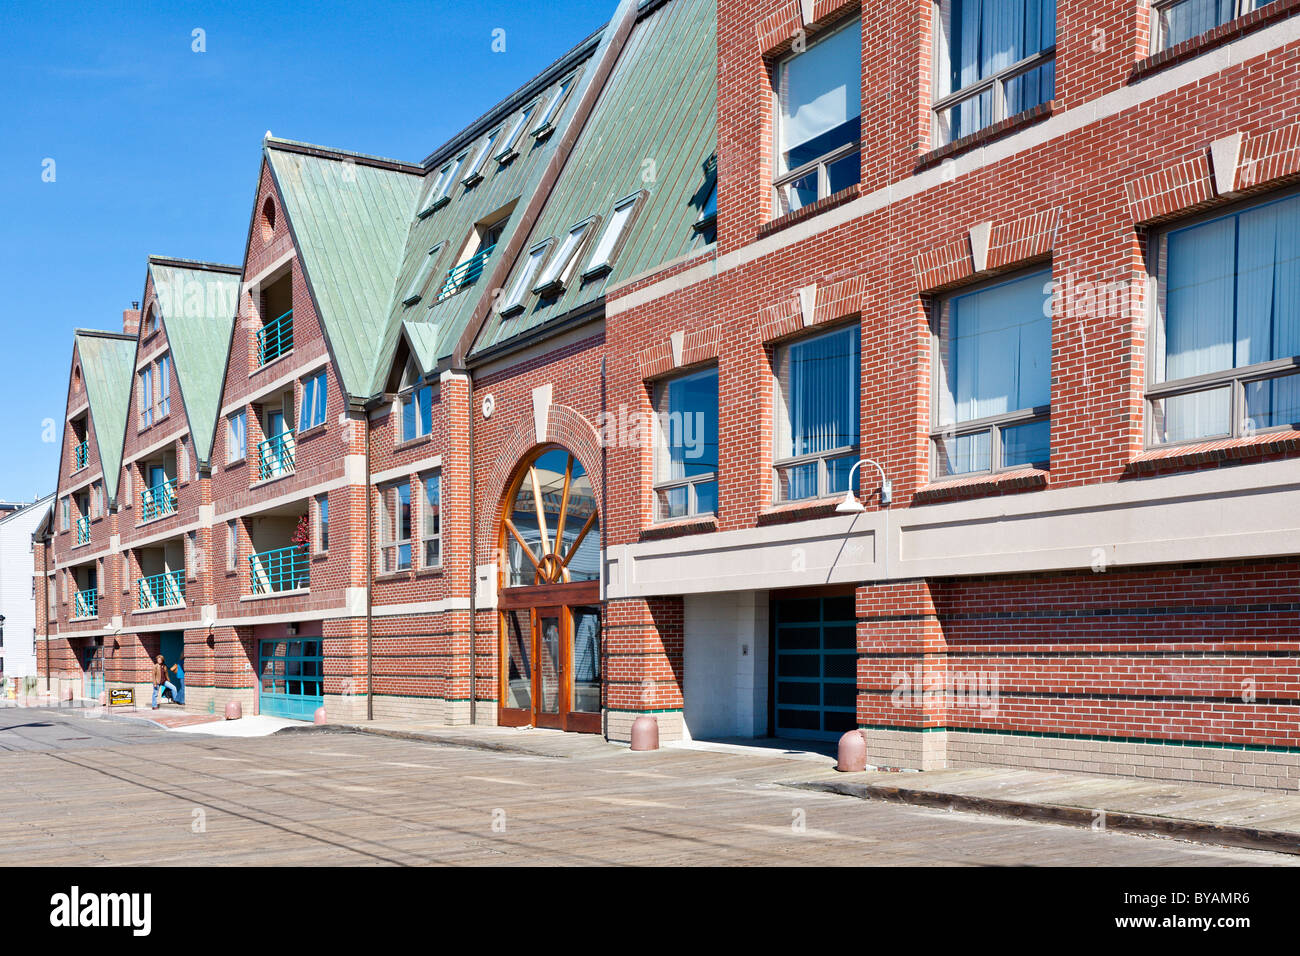 Old warehouses are converted to upscale condominiums on the wharf in the Old Port district of Portland, Maine Stock Photo